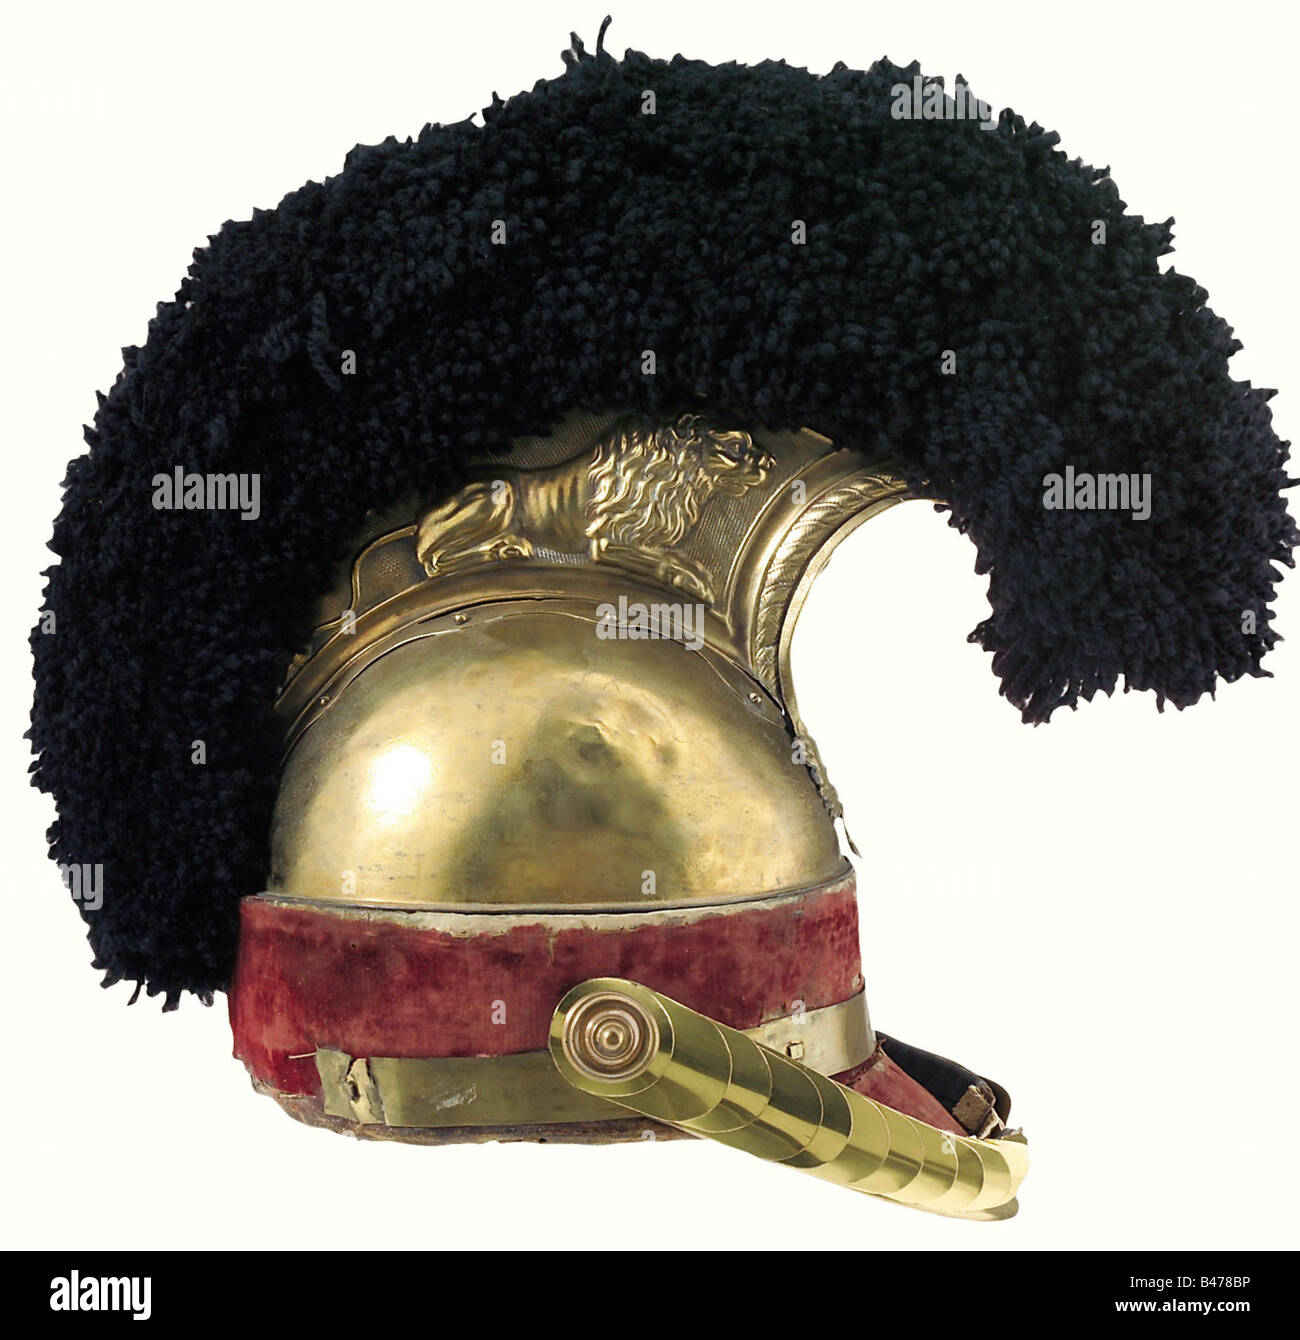 Saxony: A helmet for troopers, of the Leibkürassier guard regiment, 1810 pattern. Comb of pressed brass, with crouching lions on each side. A crowned cypher 'FA' on the frontpiece of the comb. The brass bowl is manufactured in two halves and has some ancient repairs to fissures. The encircling red velvet band is original(?), the leather visor is covered with the same material. There is no neck guard. The rear quarter of the encircling brass band is missing. The crest of black wool, chinscales and plume holder are replacements, the leather lining is original. A , Stock Photo